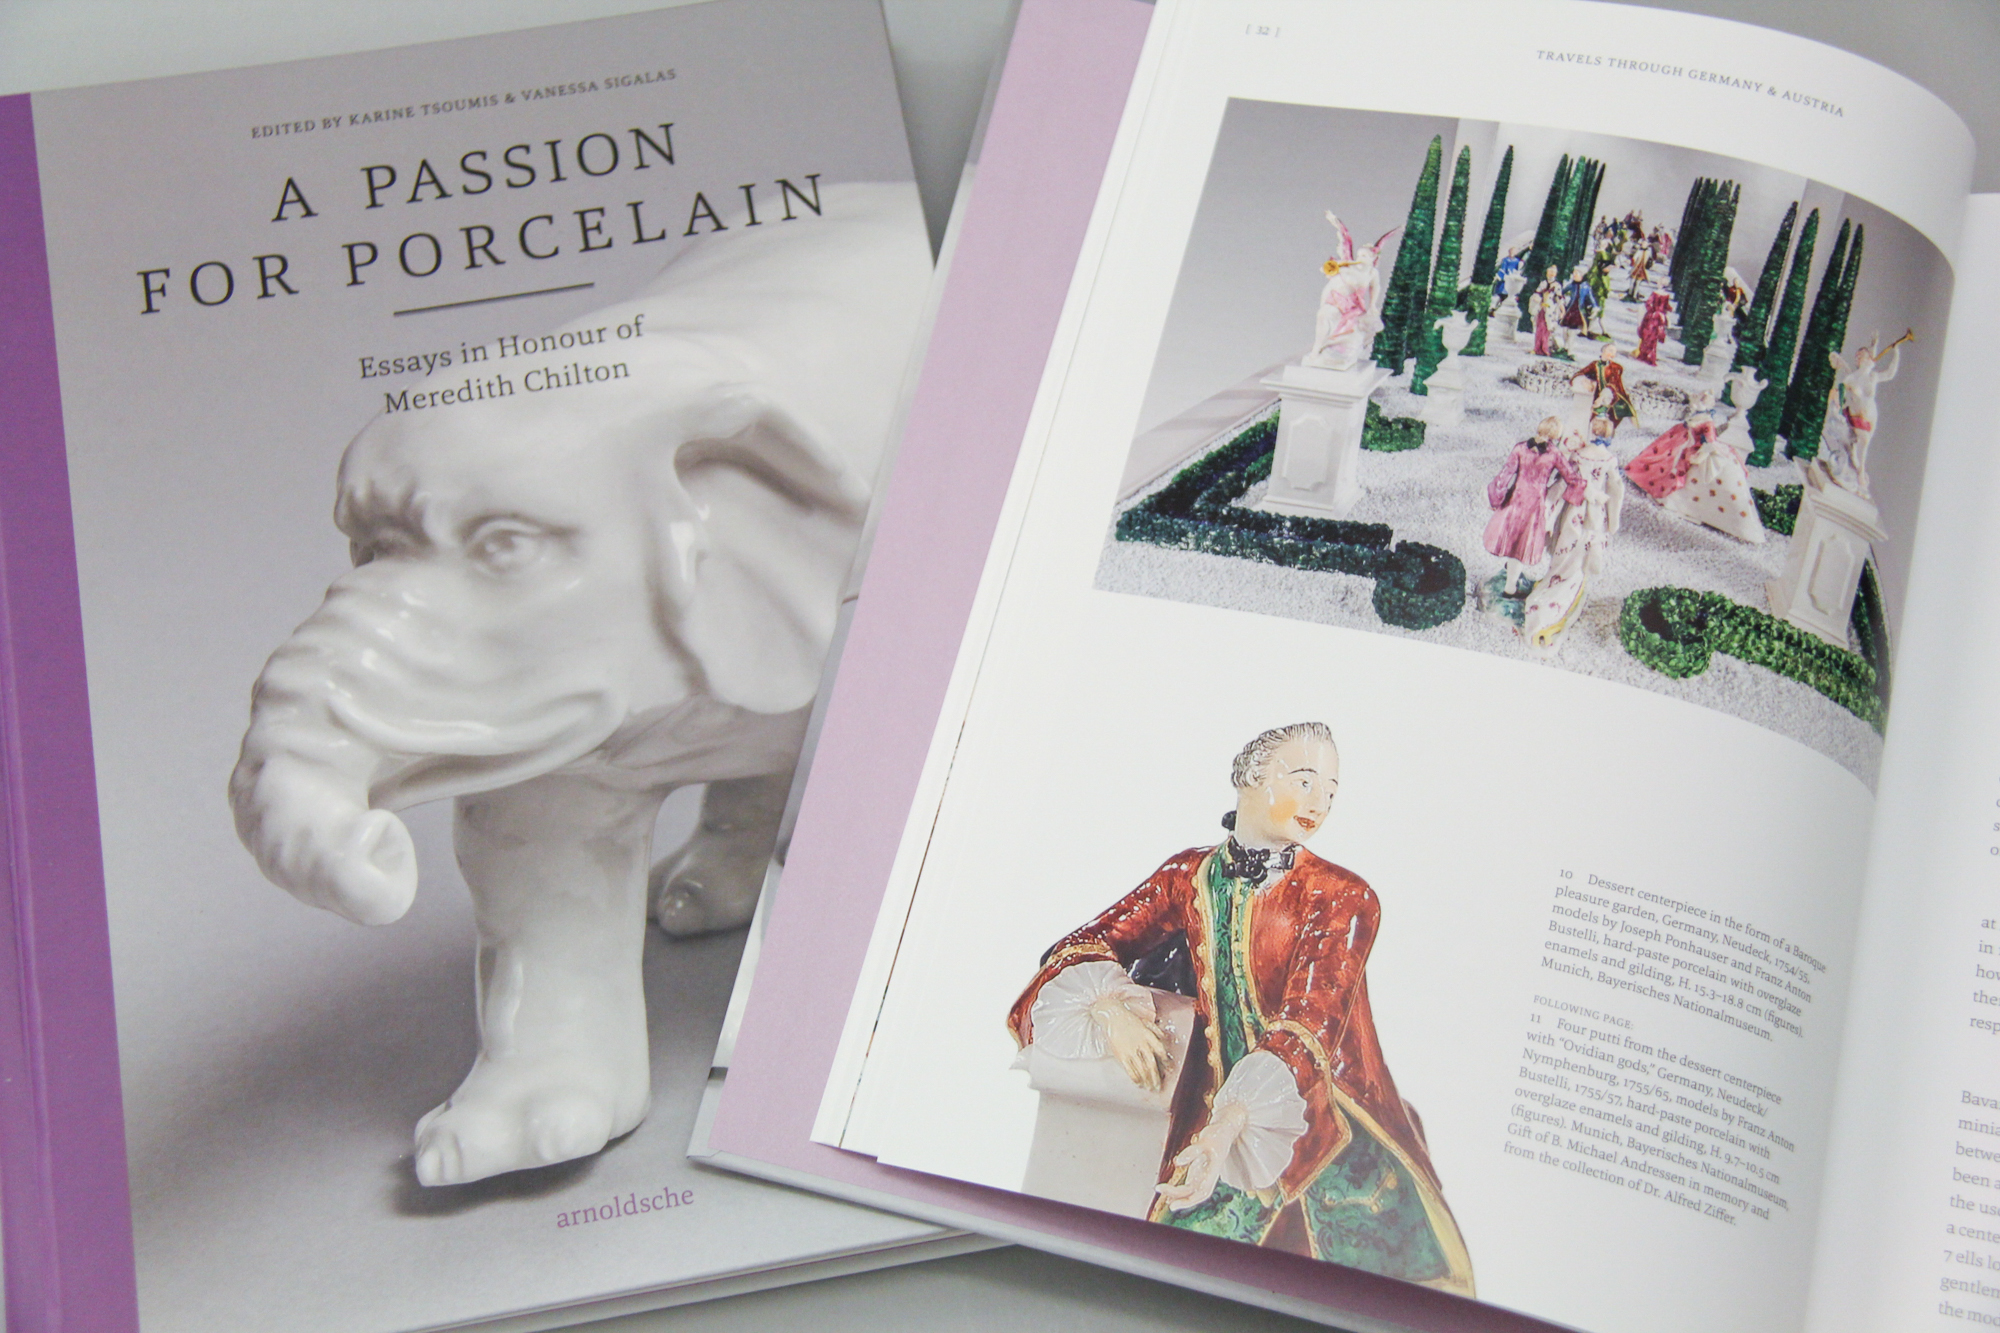 A Passion for Porcelain: Essays in Honour of Meredith Chilton Product Image 2 of 4